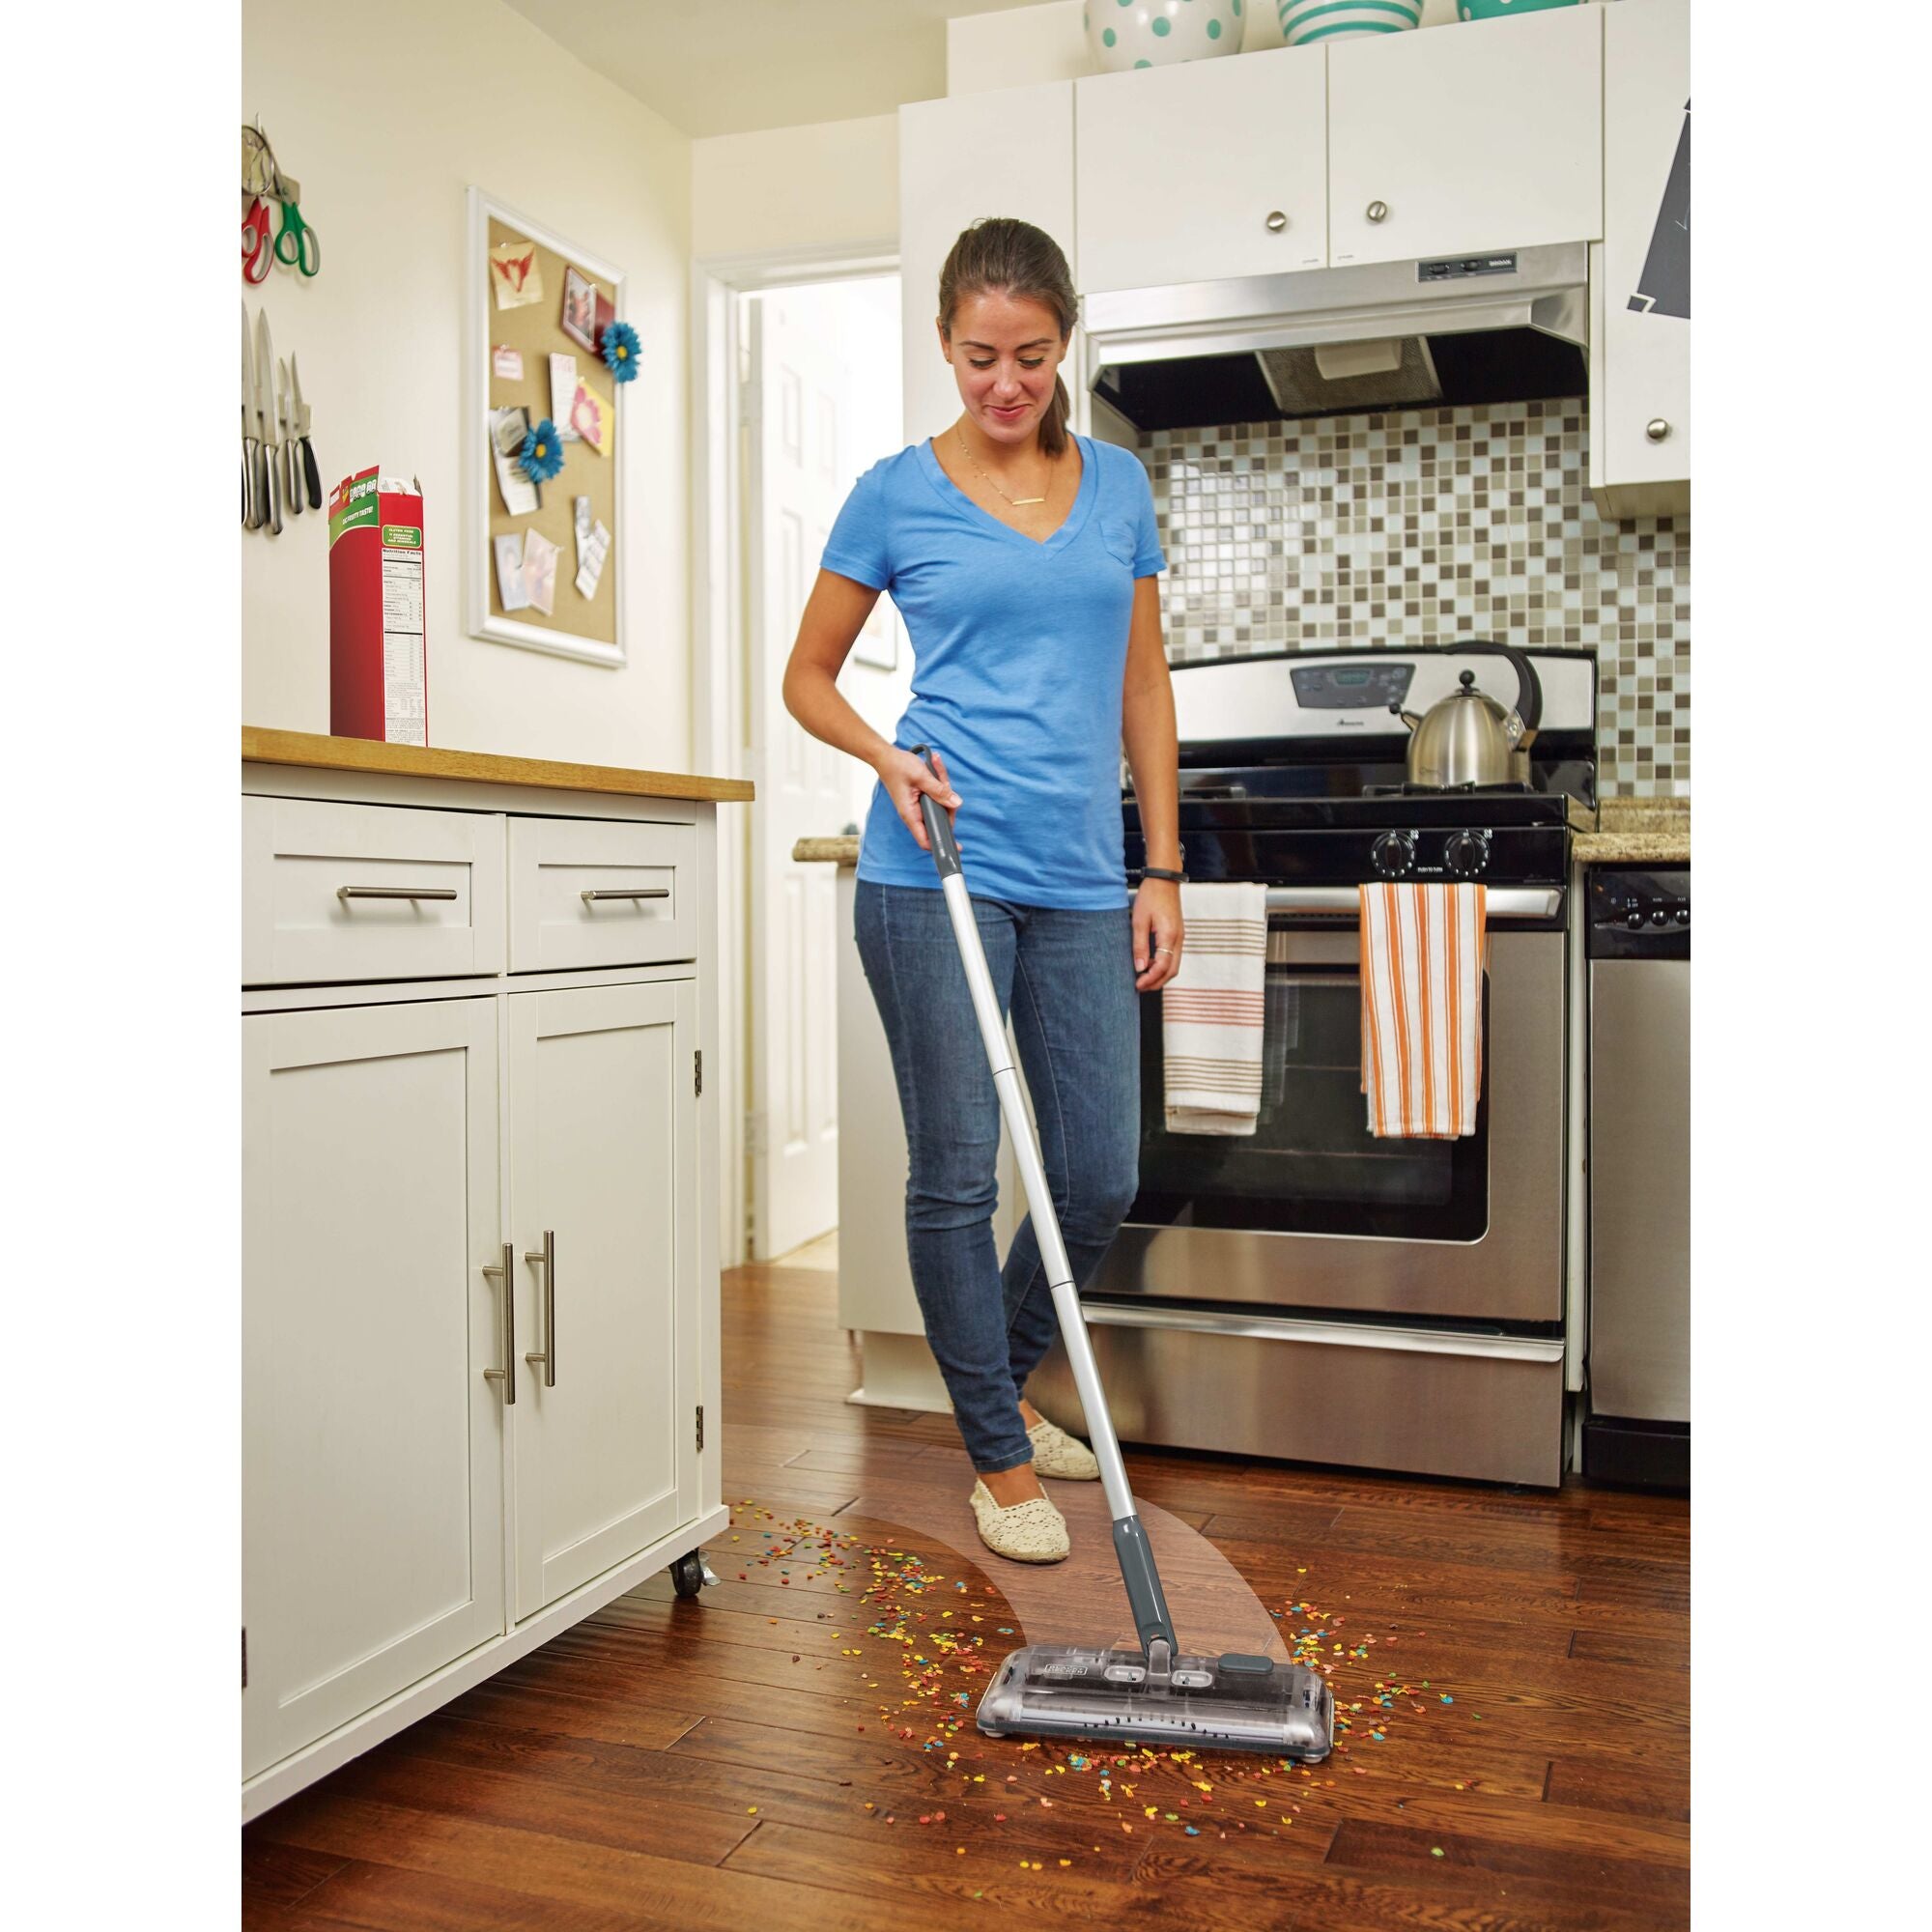 Black And Decker Cordless Rechargeable Lithium Powered Floor Sweeper blue  new